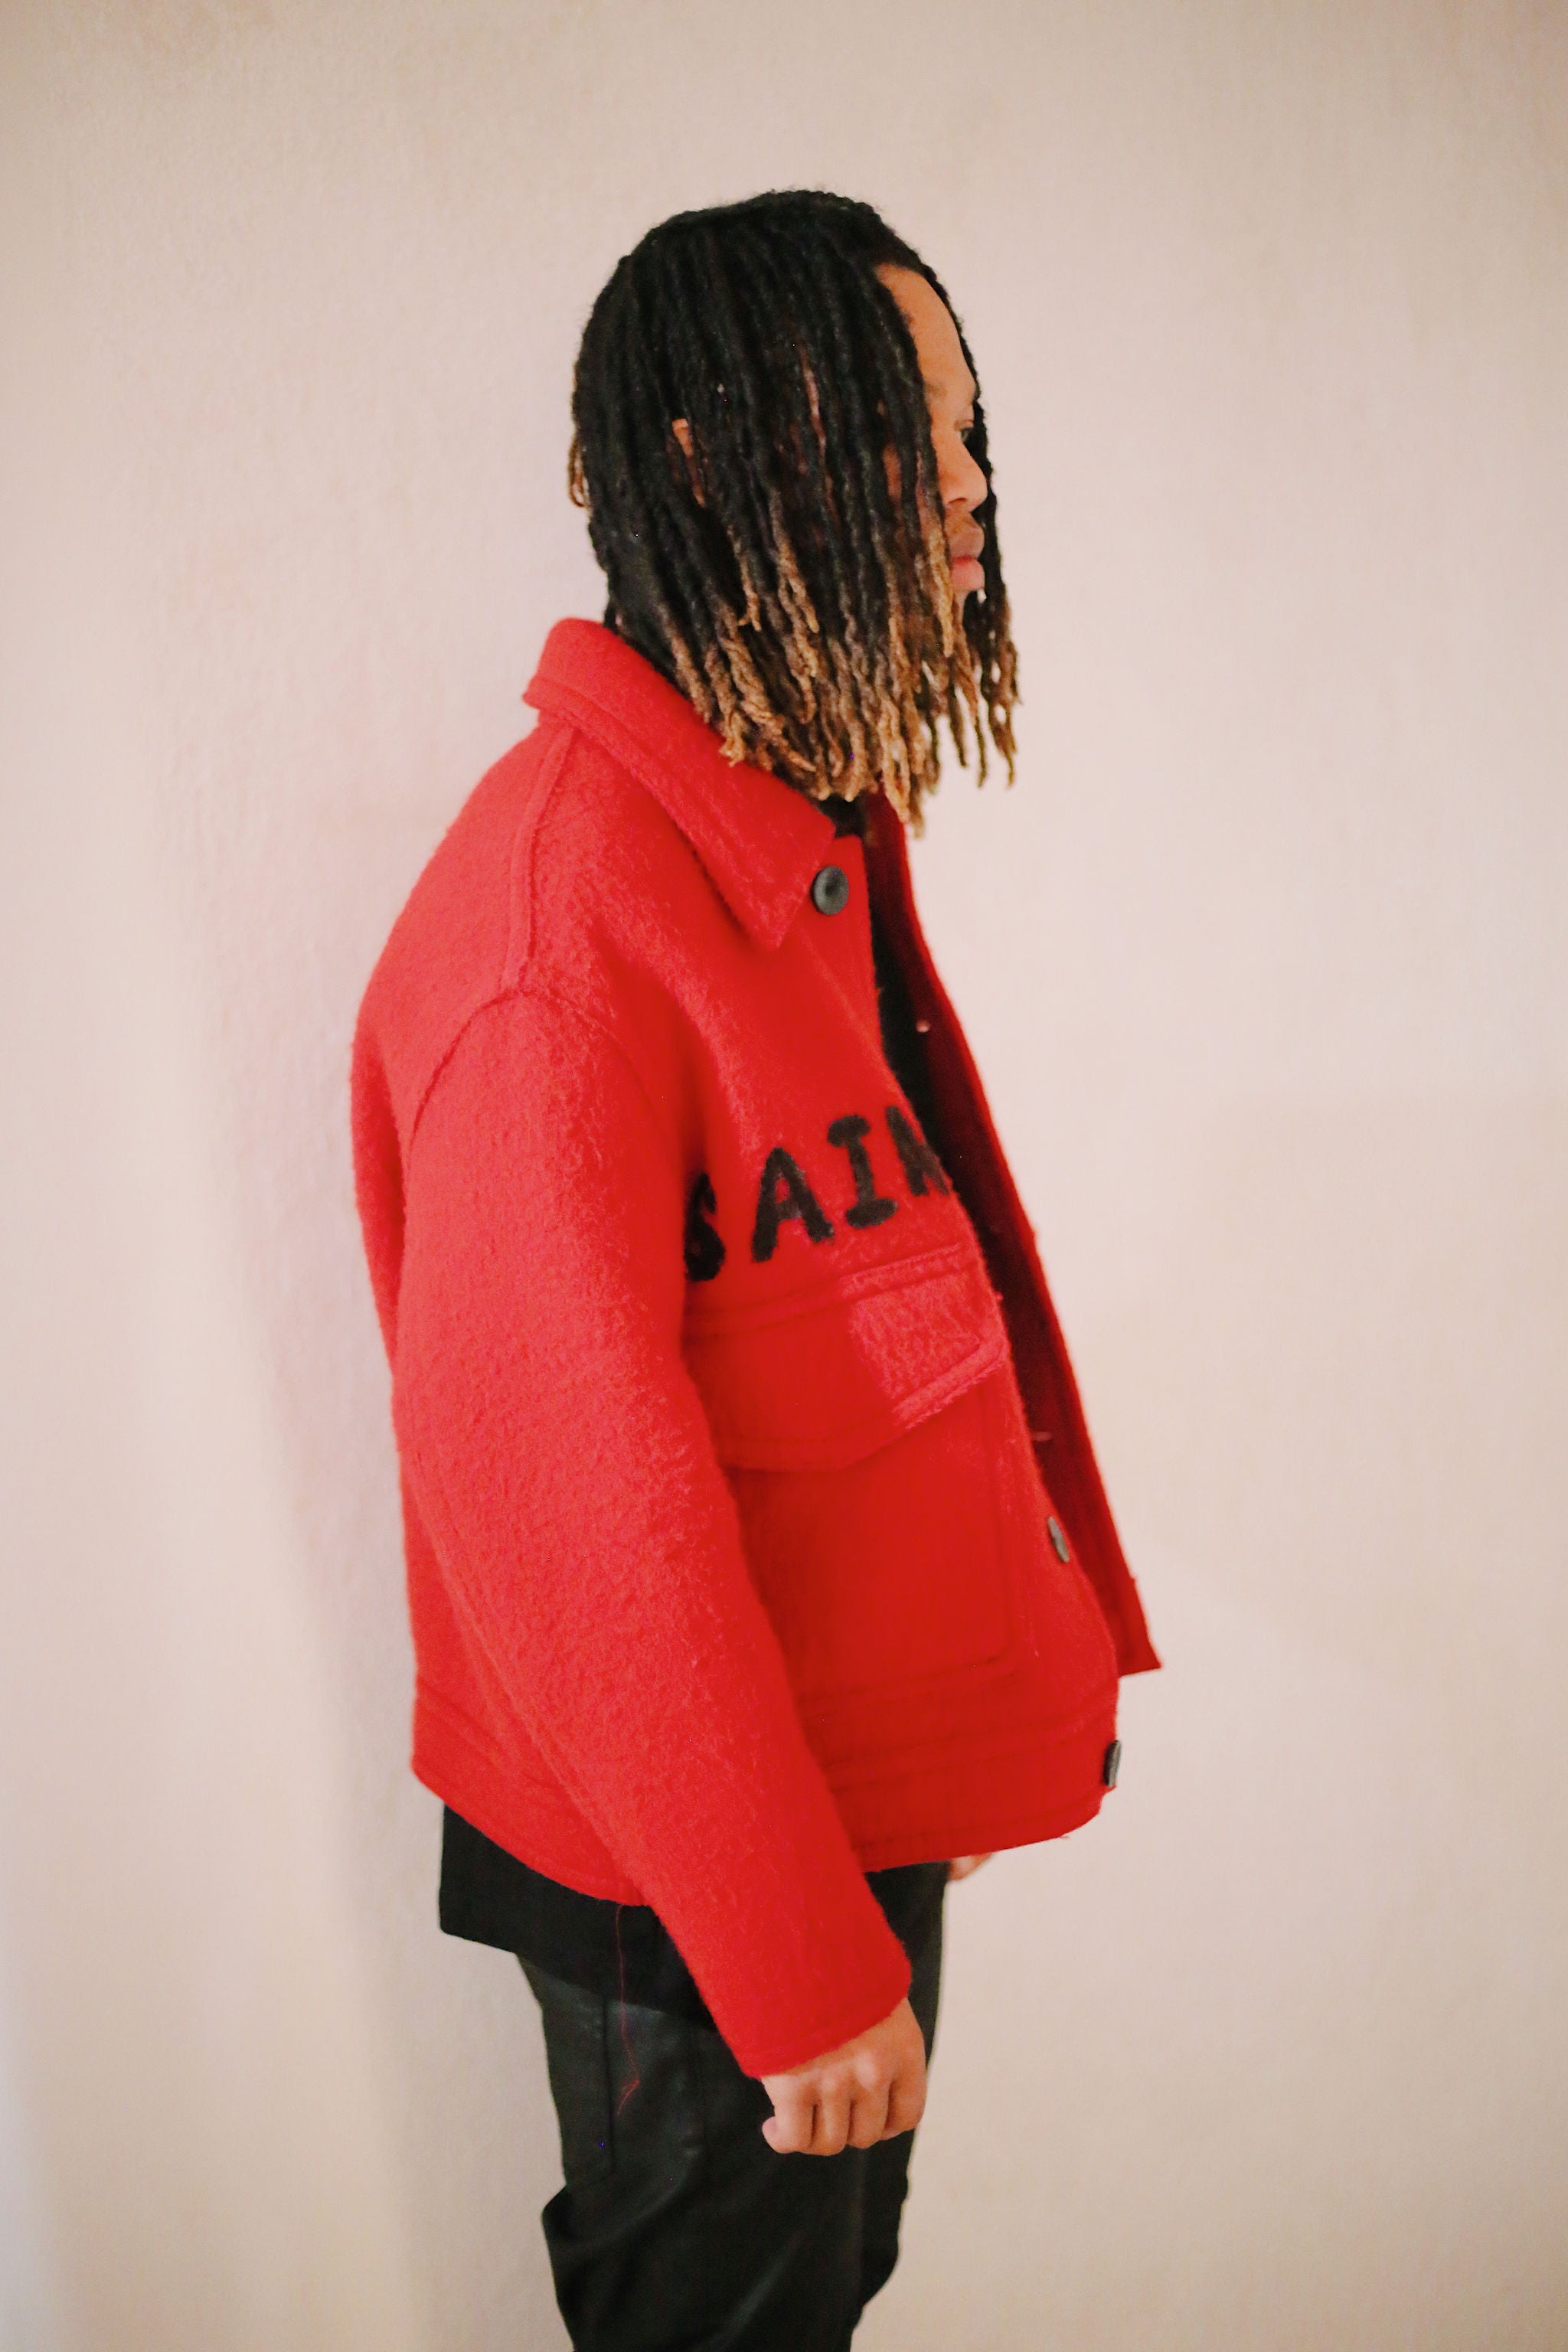 The Red Love Boxy jacket